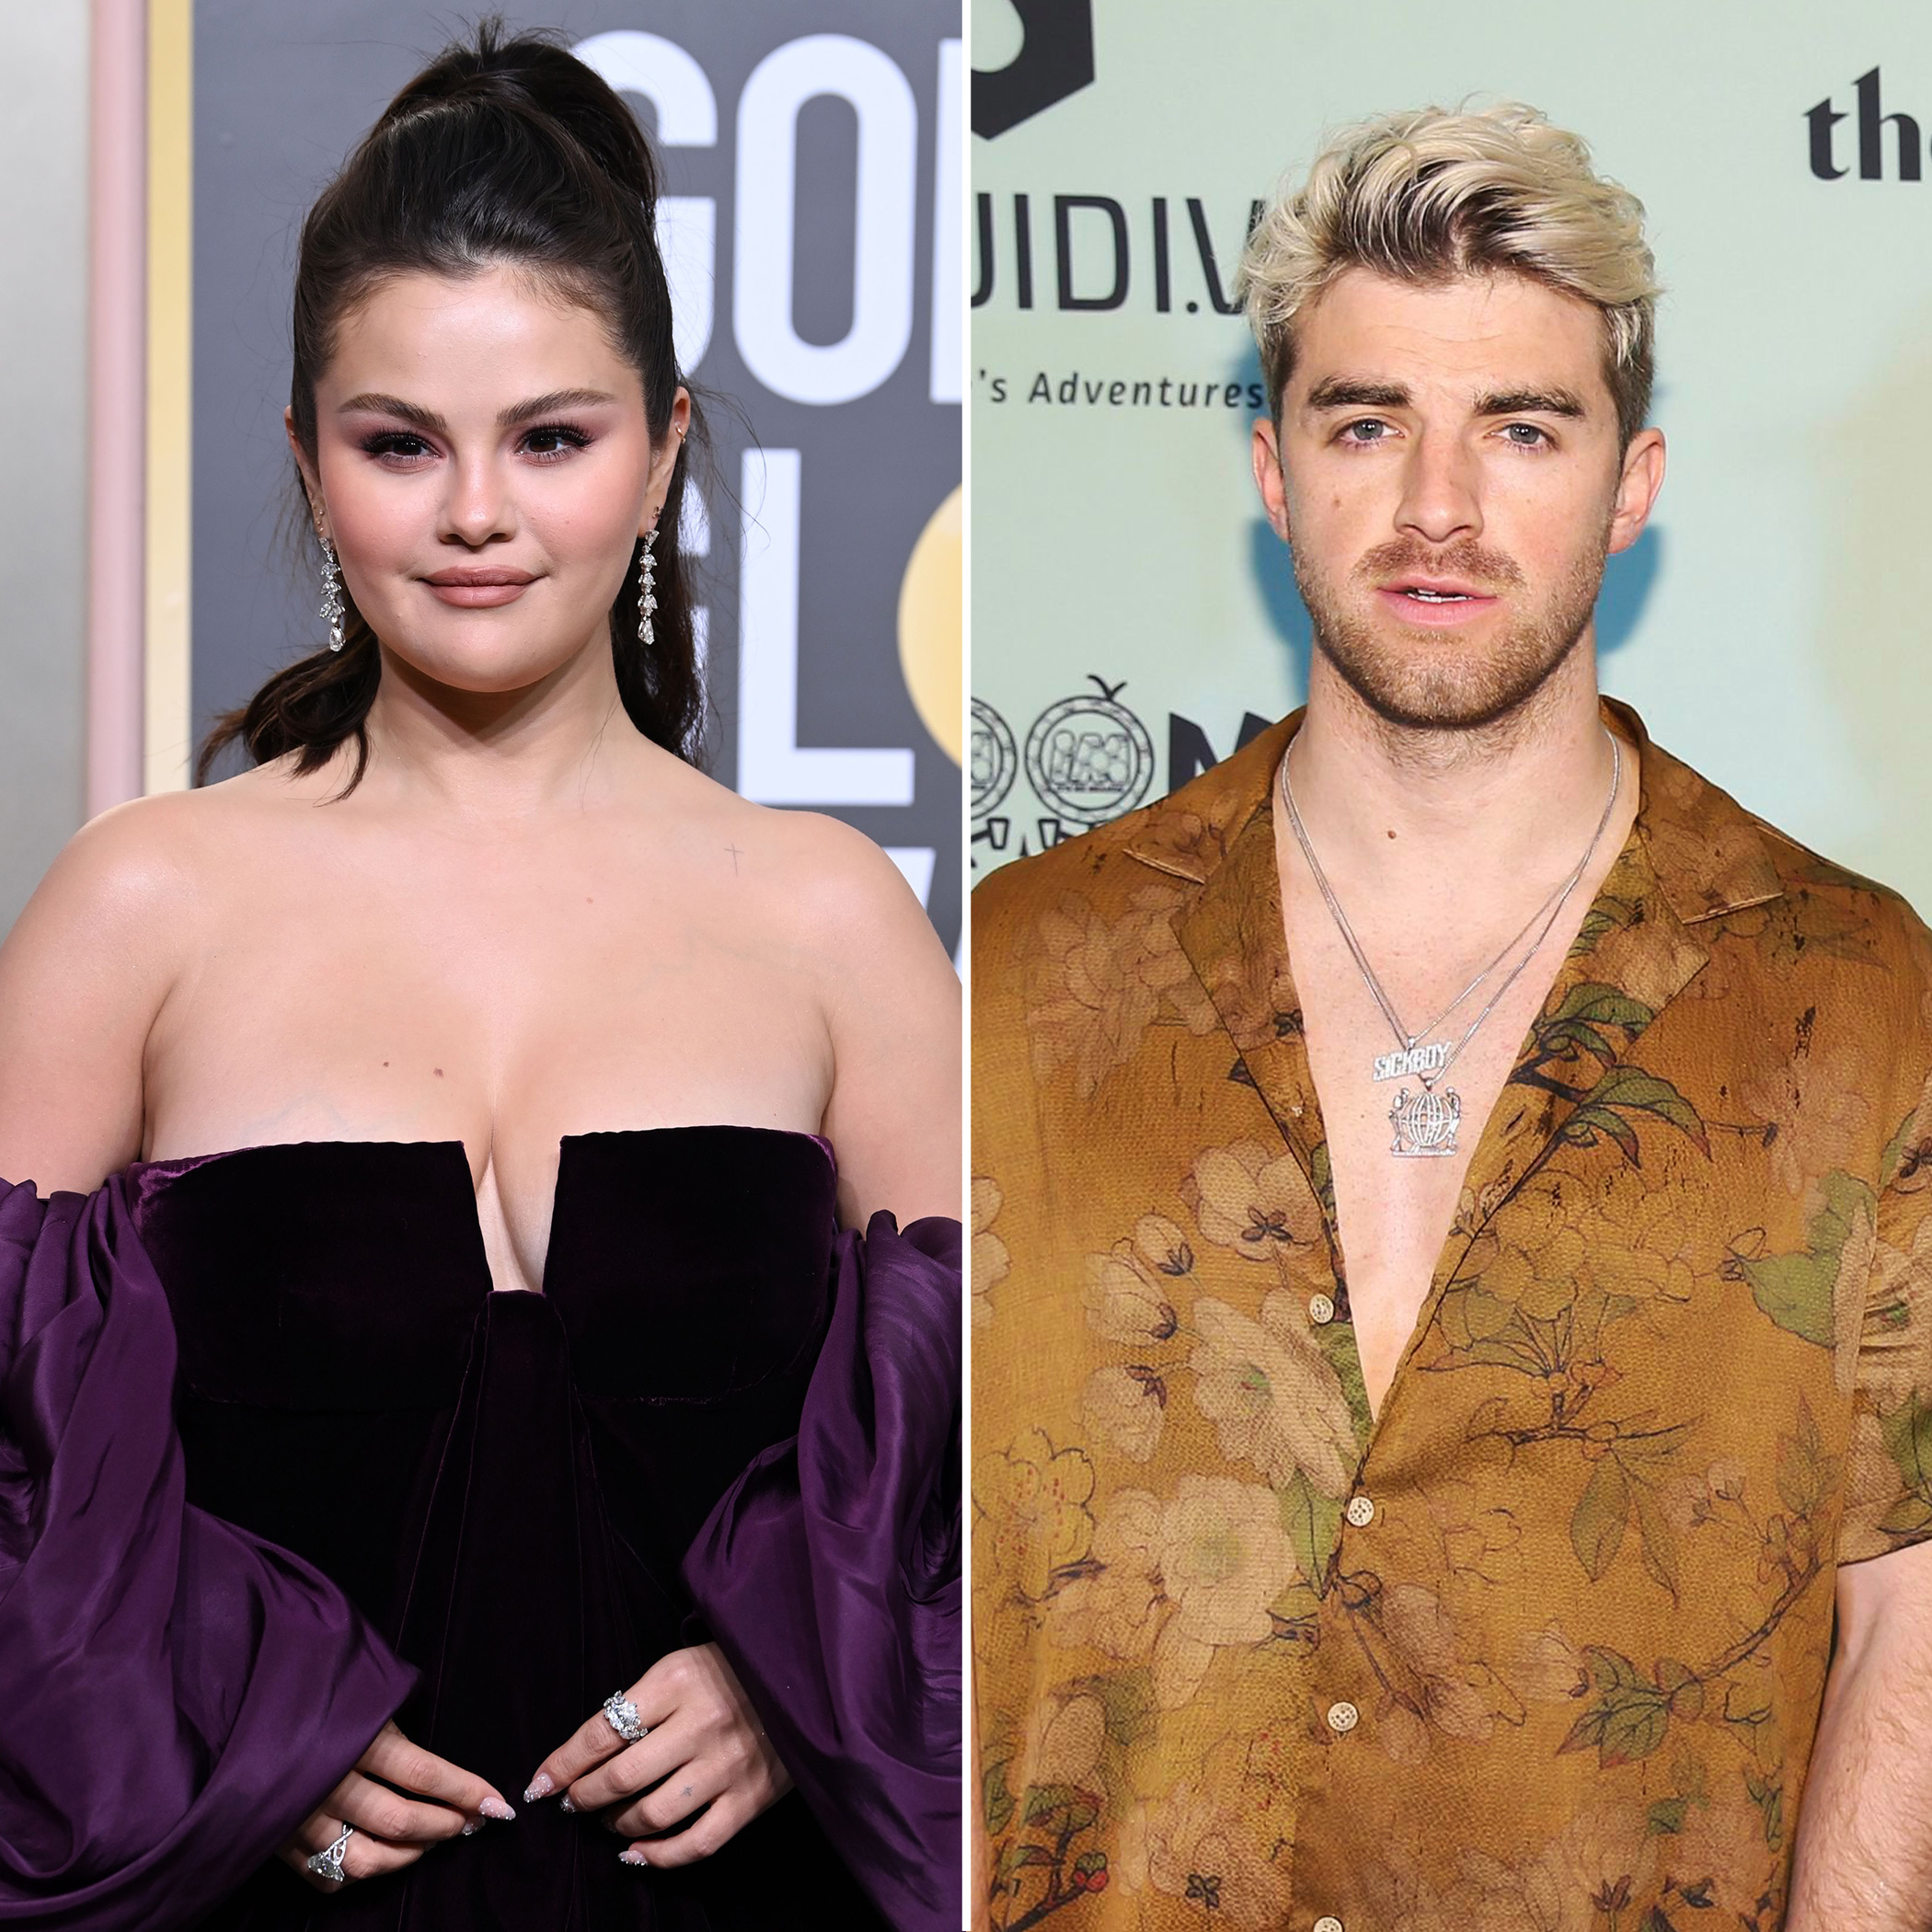 Free Vintage Porn Videos Selena Gomez - Selena Gomez Is Dating The Chainsmokers' Drew Taggart: Details